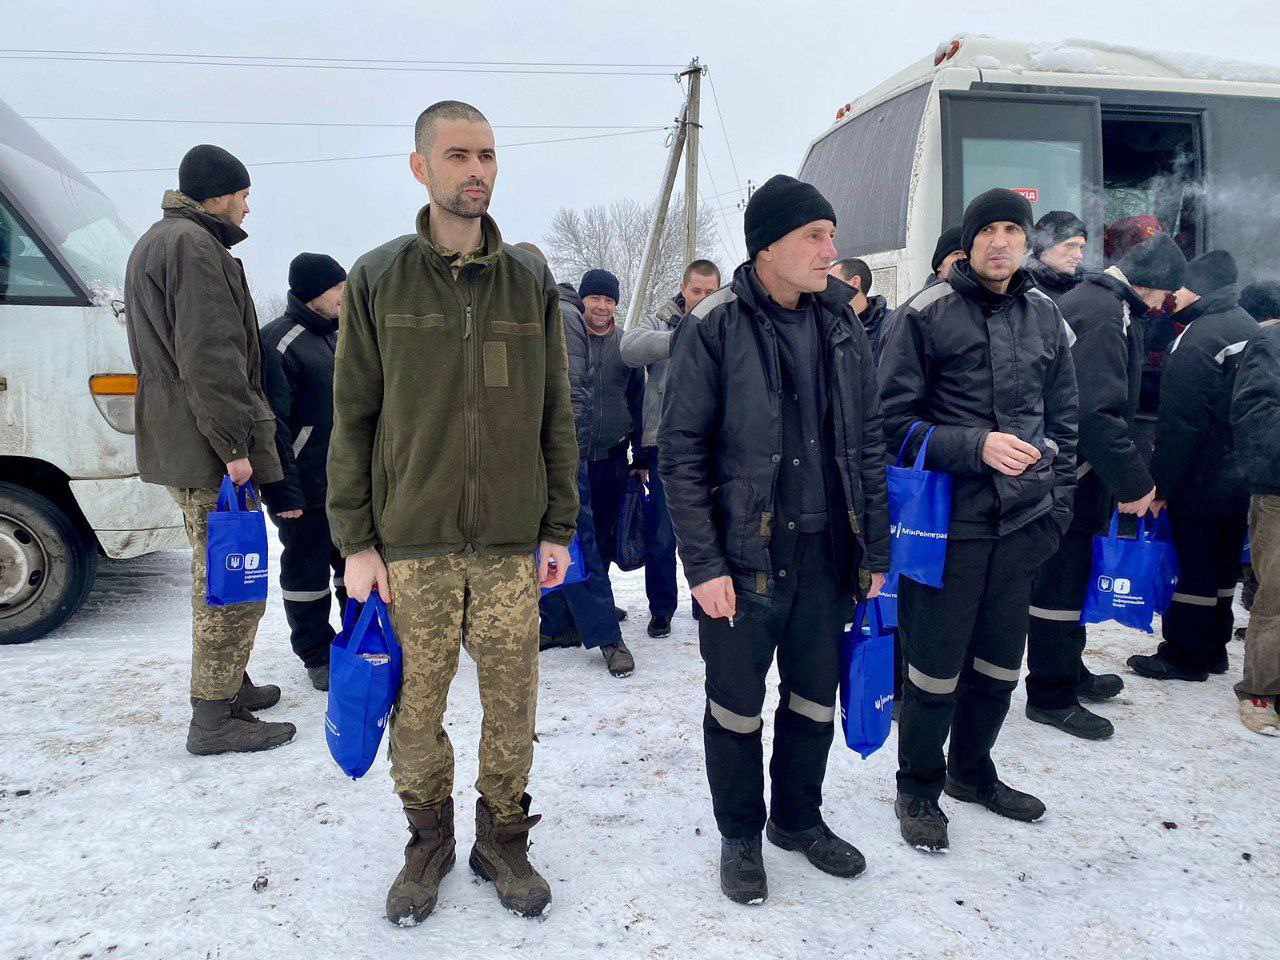 epa10447045 A handout photo made available by the Ministry of Defence of Ukraine on 04 February 2023 shows Ukrainian prisoners of war (POWs) after a prisoner exchange at an undisclosed location in Ukraine. The Head of the Office of the President of Ukraine, Andriy Yermak, announced on 04 February 2023, that 116 Ukrainian military personnel were freed from Russian captivity and returned to Ukraine in a prisoner exchange. Along with the POWs, the bodies of British volunteers Chris Parry and Andrew Bagshaw, as well of volunteer Evgen Kulyk, had been returned, Yermak added. The Russian Ministry of Defense said in a statement that 63 servicemen of the Armed Forces of the Russian Federation were freed as a result of a 'complex negotiation process'.  EPA/MINISTRY OF DEFENCE OF UKRAINE HANDOUT -- BEST QUALITY AVAILABLE -- MANDATORY CREDIT: MINISTRY OF DEFENCE OF UKRAINE -- HANDOUT EDITORIAL USE ONLY/NO SALES